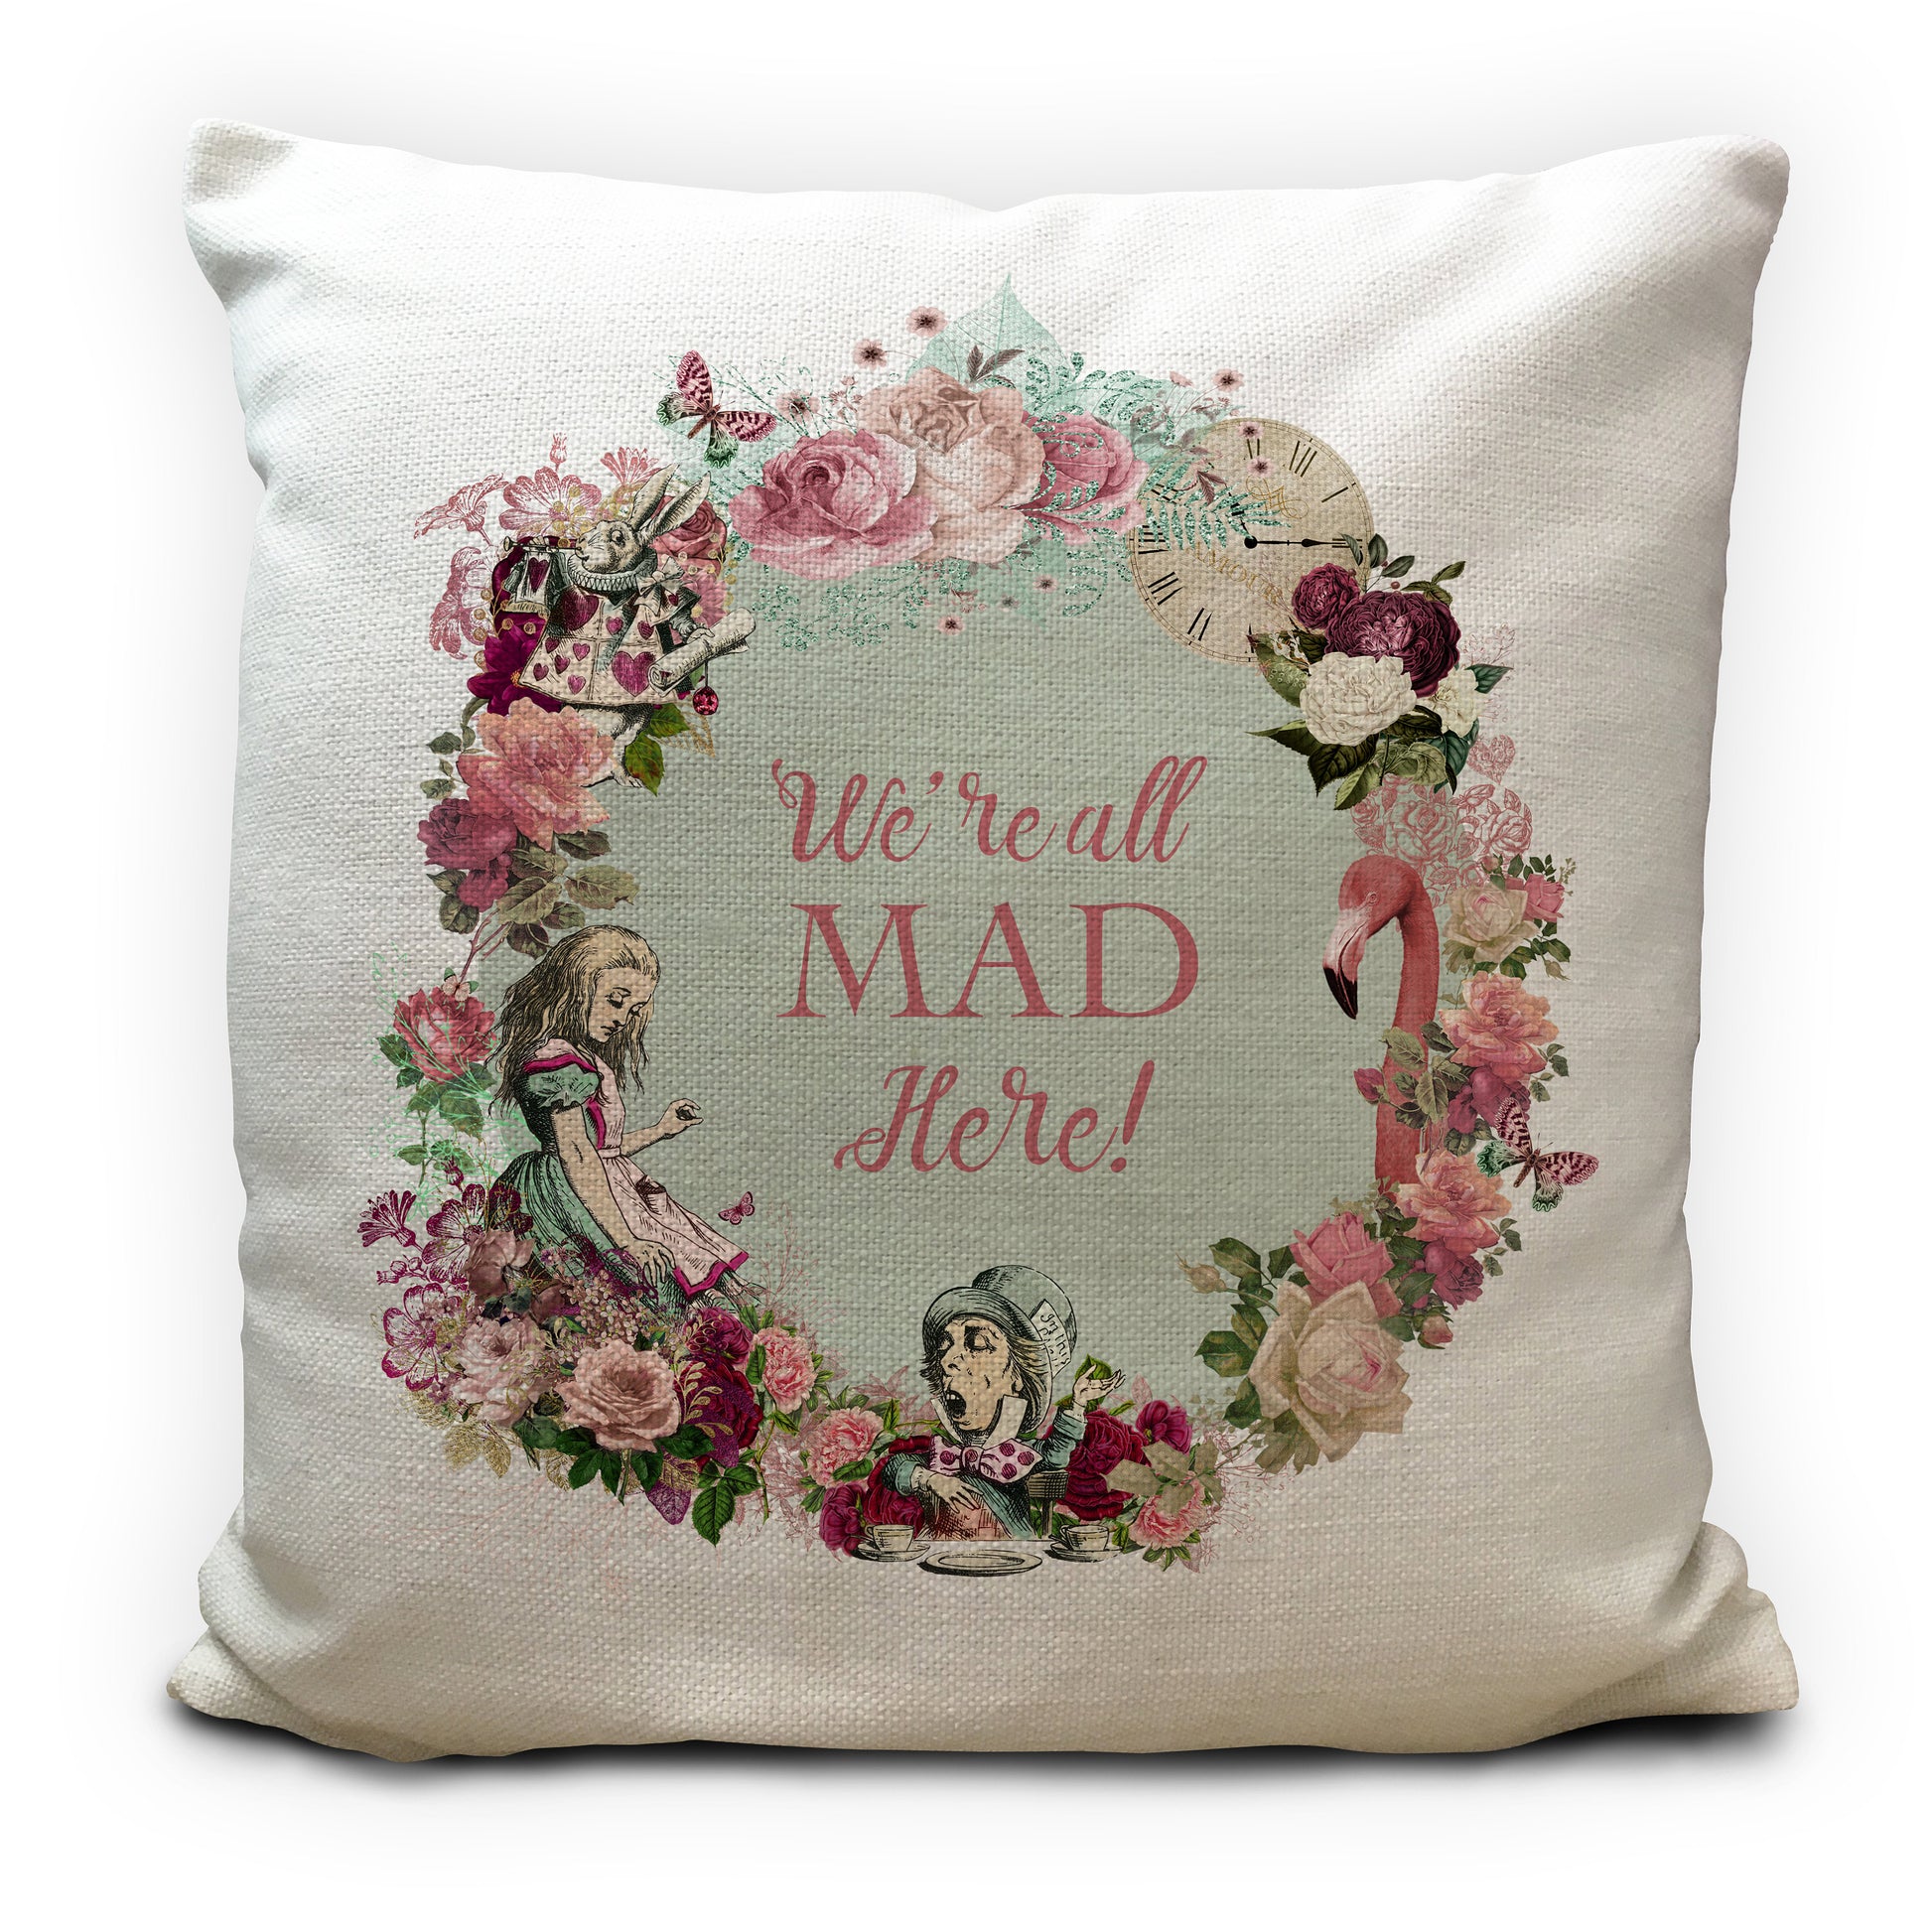 Alice in wonderland cushion cover with illustrations montage and all mad here quote